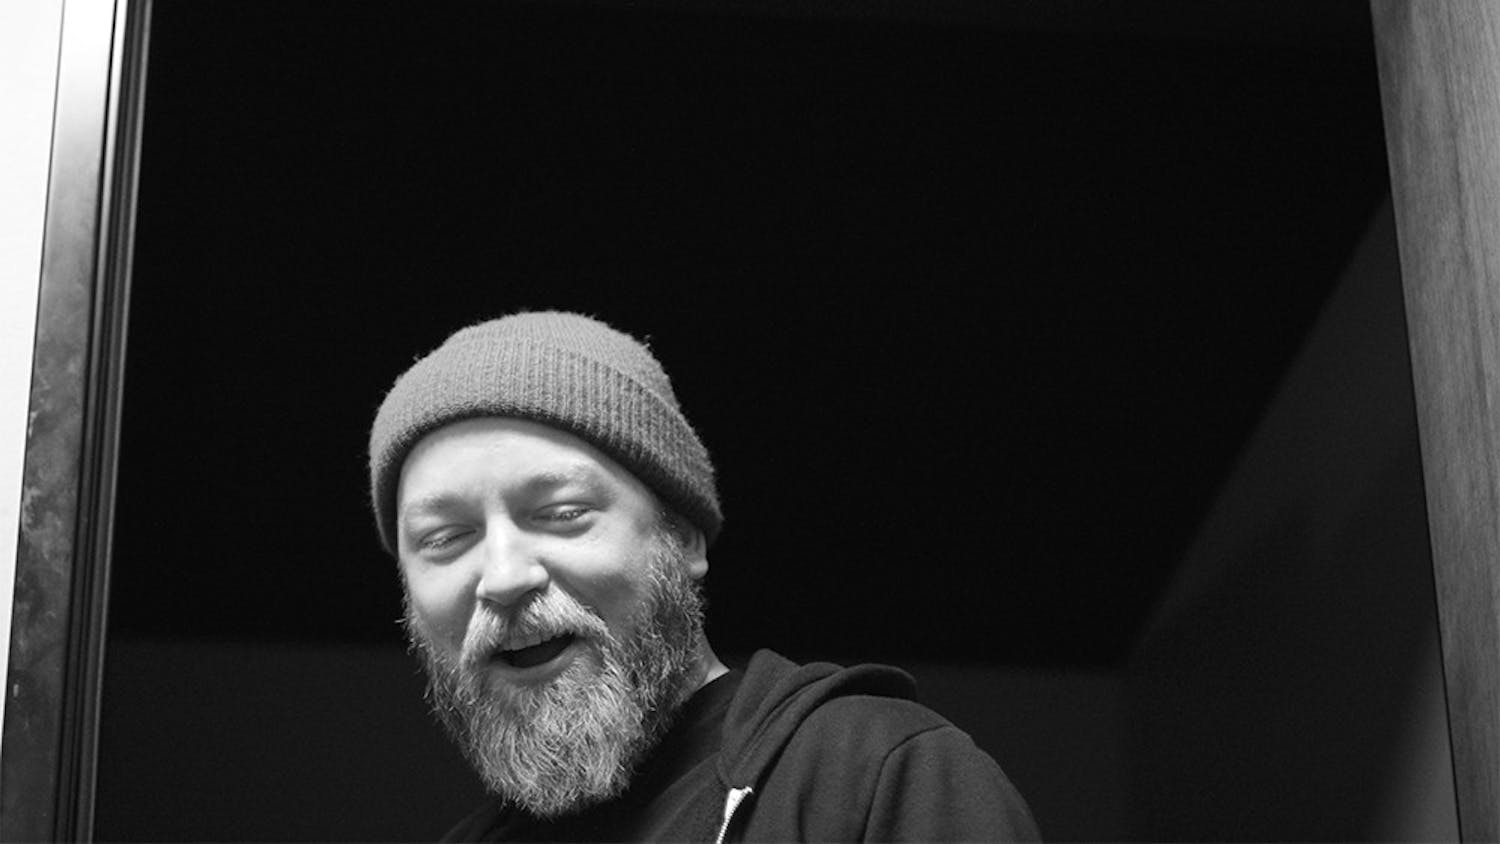 Comedian Kyle Kinane will return to the Comedy Attic at 8 p.m. Thursday.